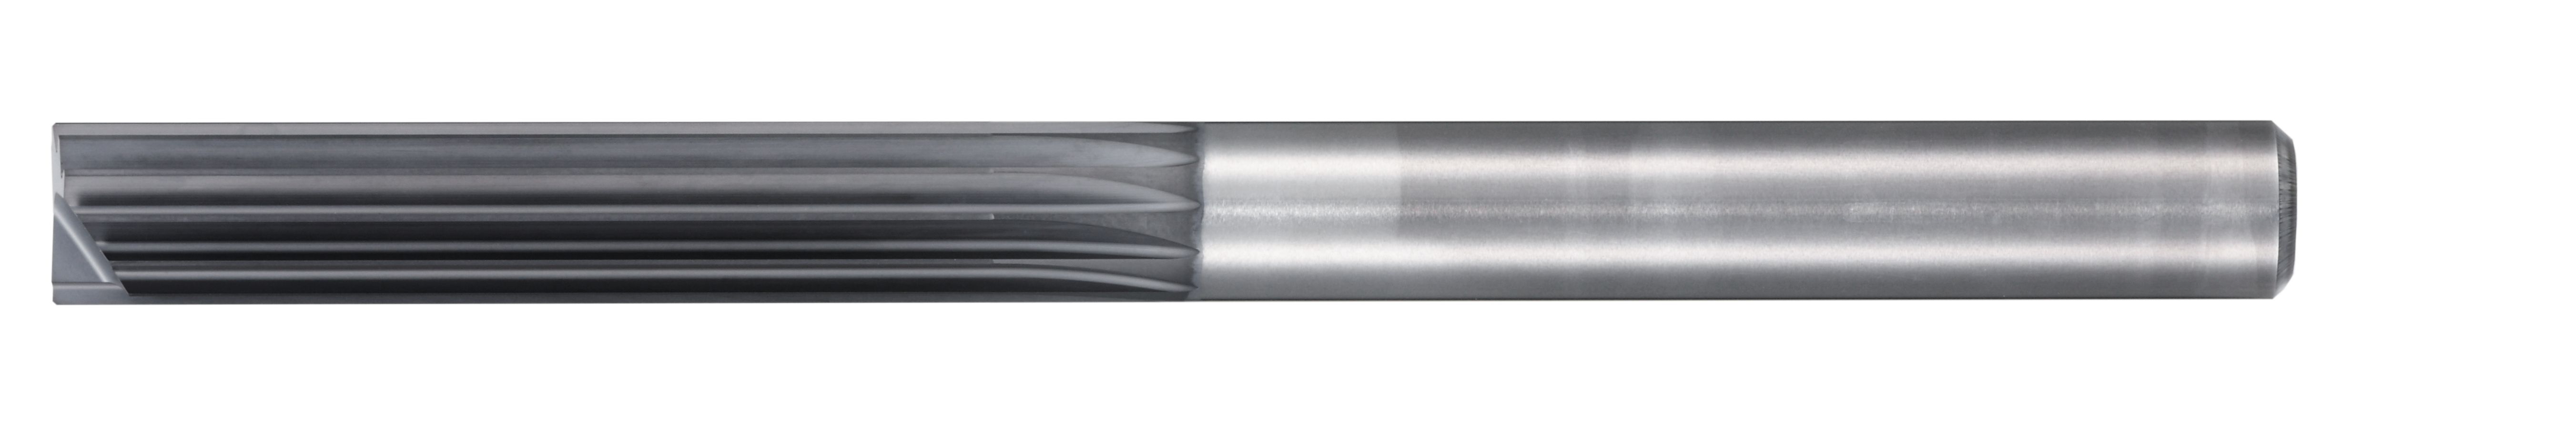 Grooving/Shouldering Multi-Flute End Mill for CFRP with End Flute CR100 6719